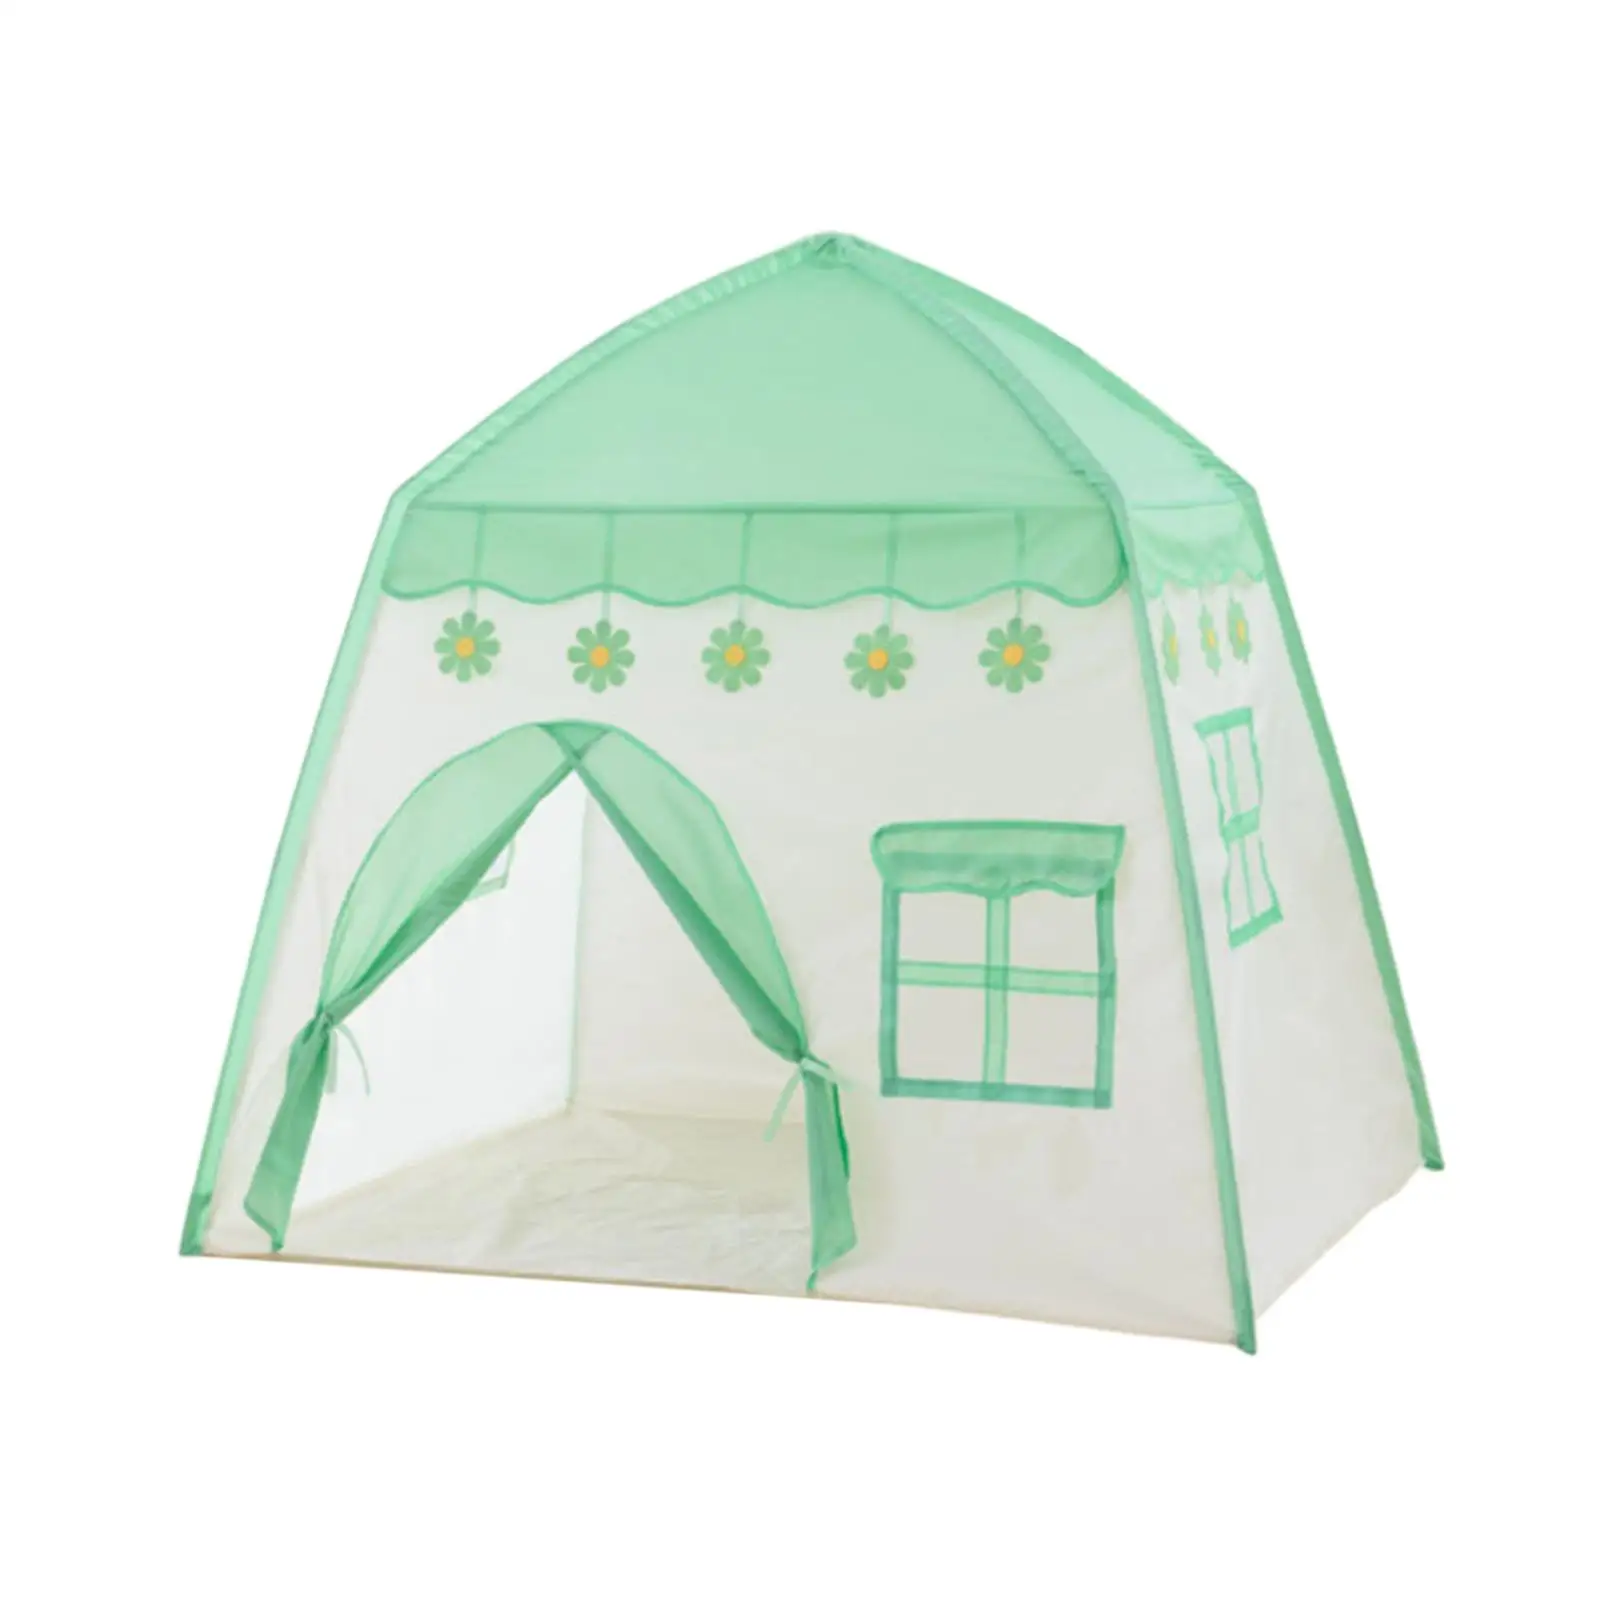 Foldable Children Toy Tent Role Play Game Multifunctional Indoor Outdoor Playground Cute for Park